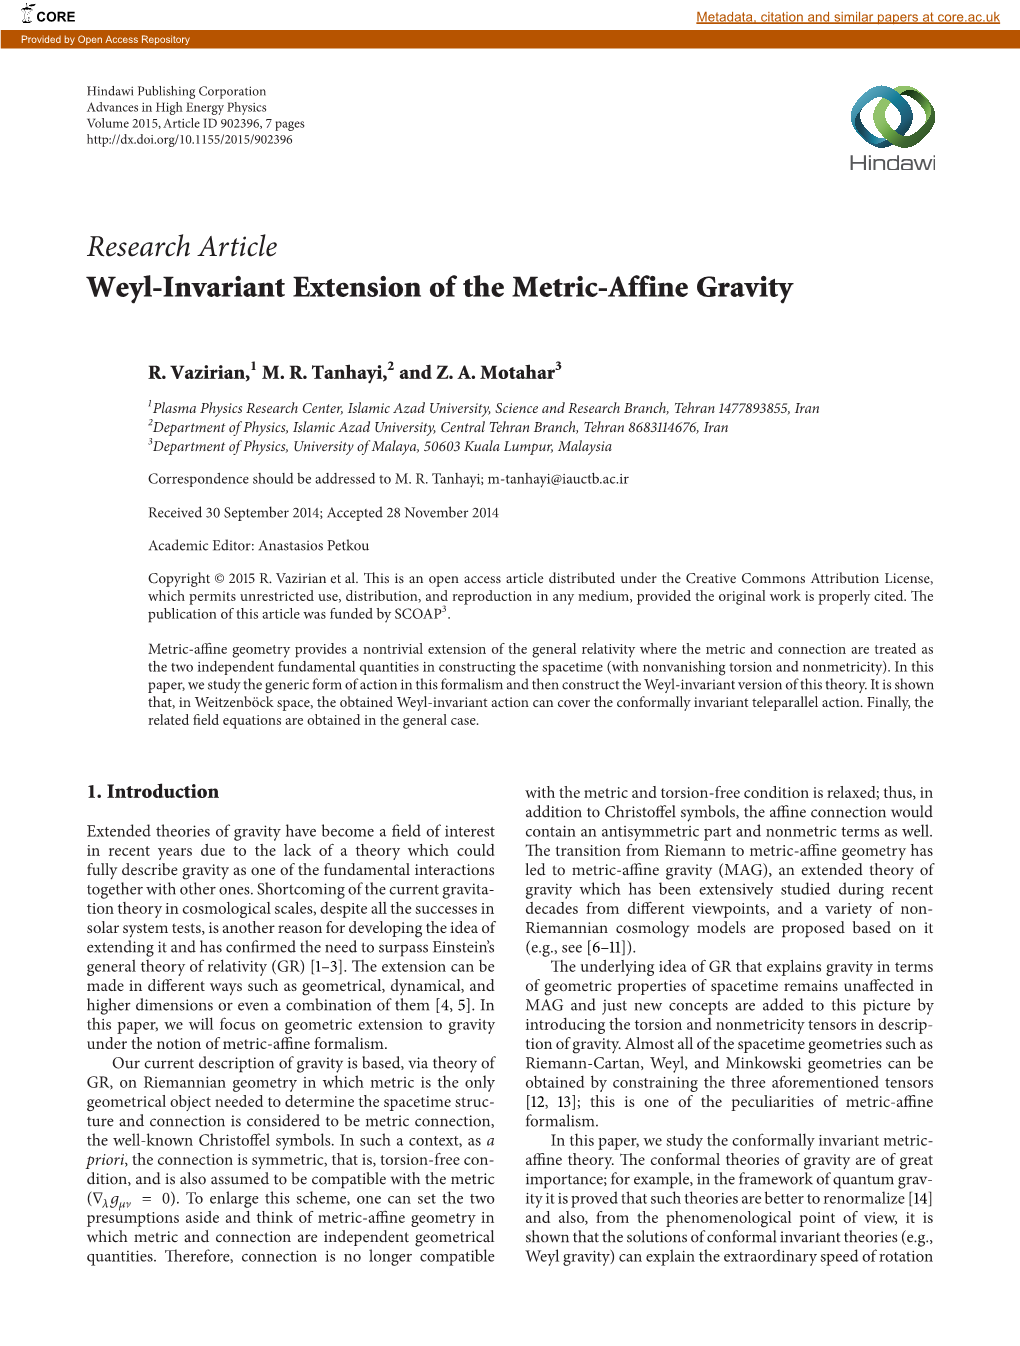 Research Article Weyl-Invariant Extension of the Metric-Affine Gravity